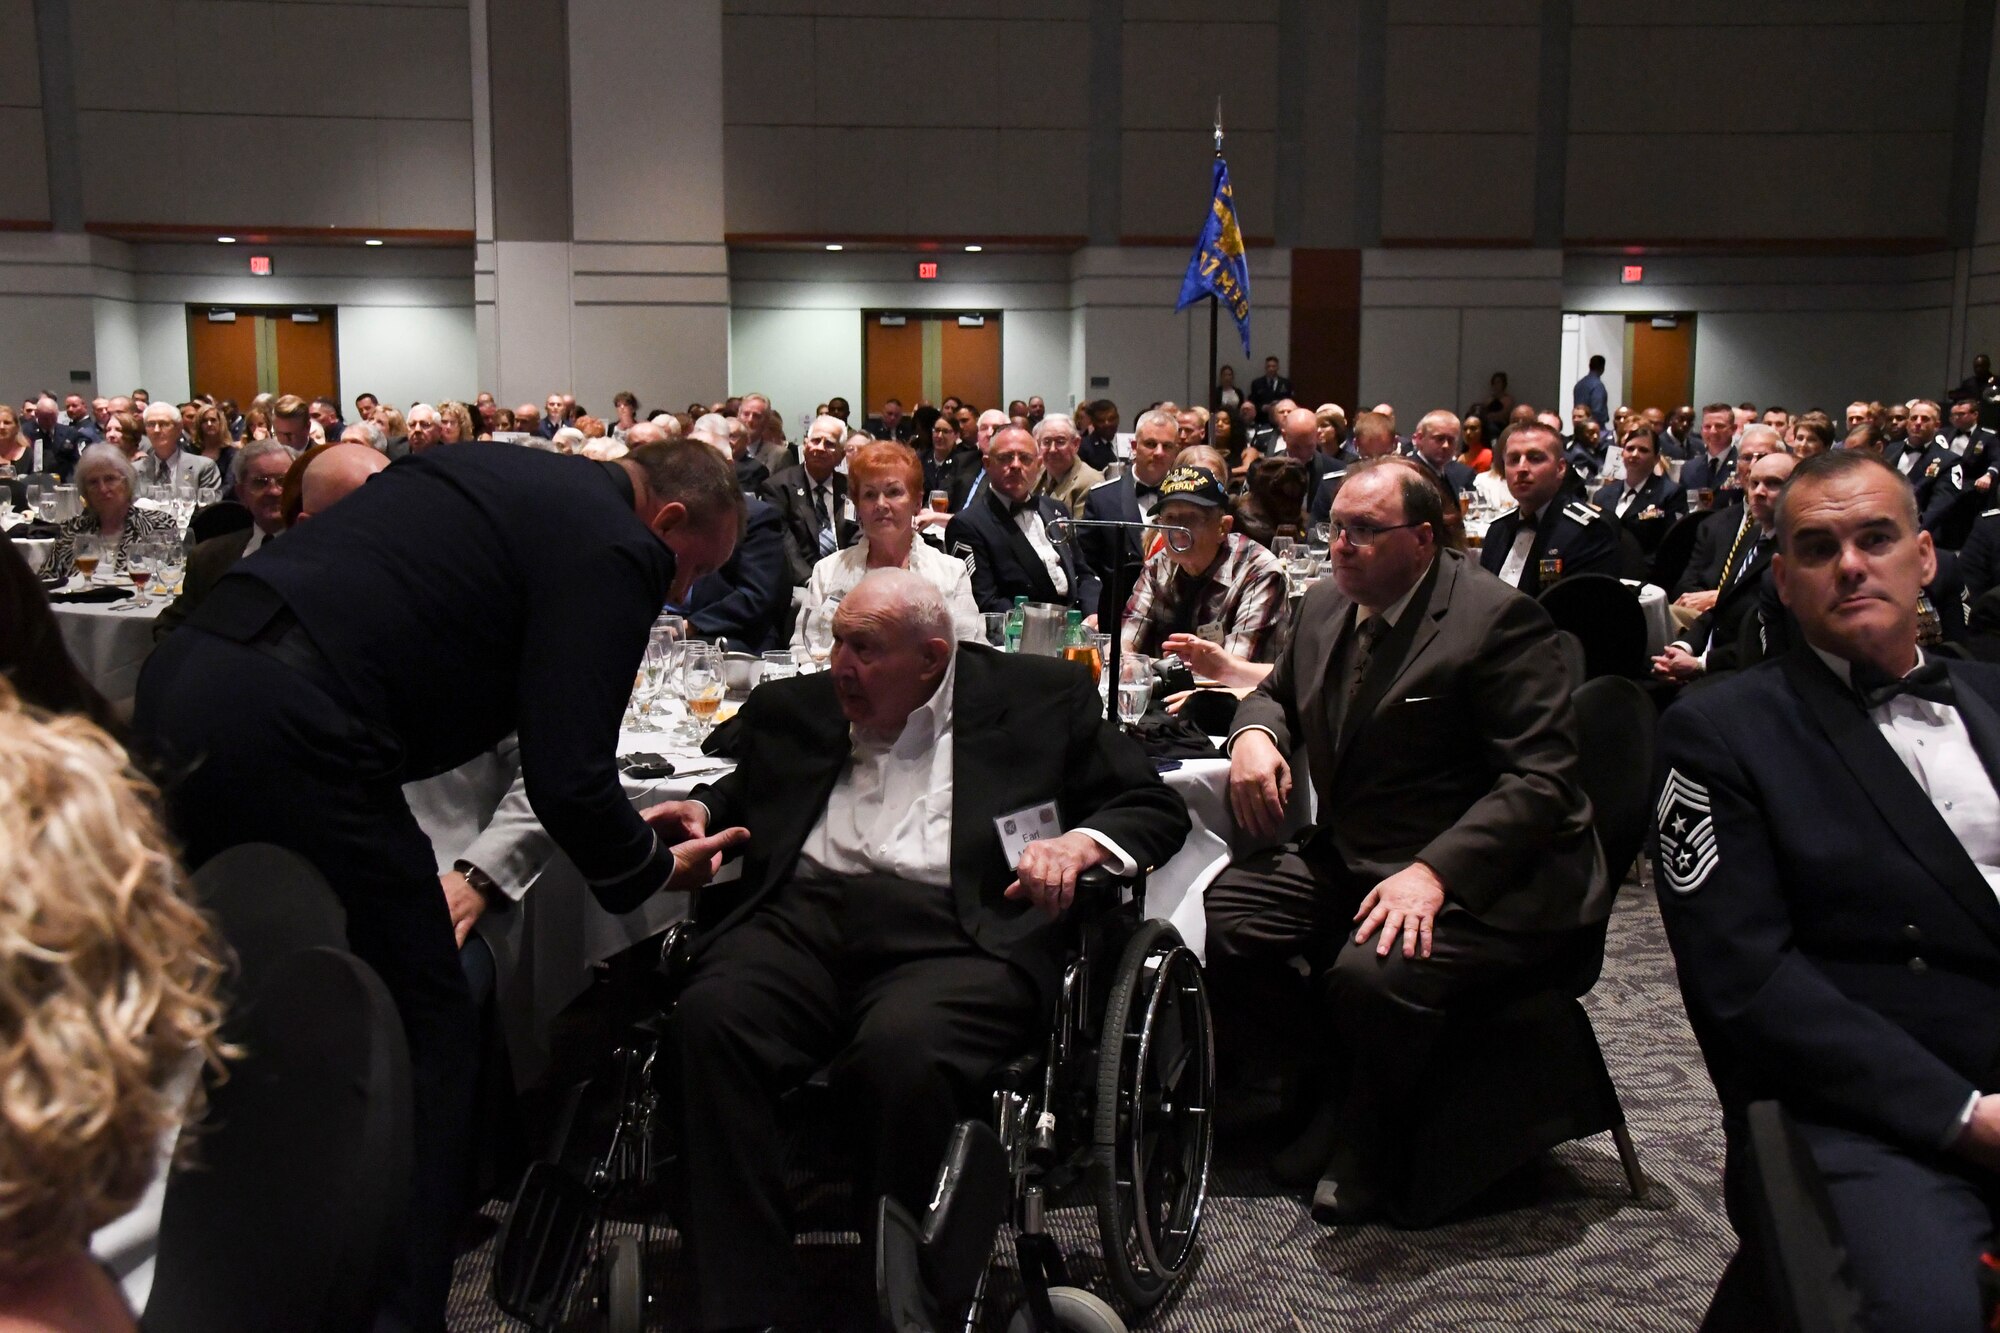 Col. Bruce R. Cox, 307th Bomb Wing commander, presents Earl McGuier, World War II 307th Bombardment Group veteran, with a Commander’s Coin during the 307th Bomb Wing’s 75th Anniversary and Awards Gala at the Shreveport Convention Center April 1, 2017. In 1942, 27 B-24 Liberators from the 307th Bombardment Group took part in one of the longest mass-raids of that era which earned them the name “The Long Rangers.” The now, 307th Bomb Wing celebrated their 75th Anniversary with alumni from wars such as World War II, Korean War, Vietnam and Operation Inherent Resolve. (U.S. Air Force photo by Staff Sgt. Callie Ware/Released)